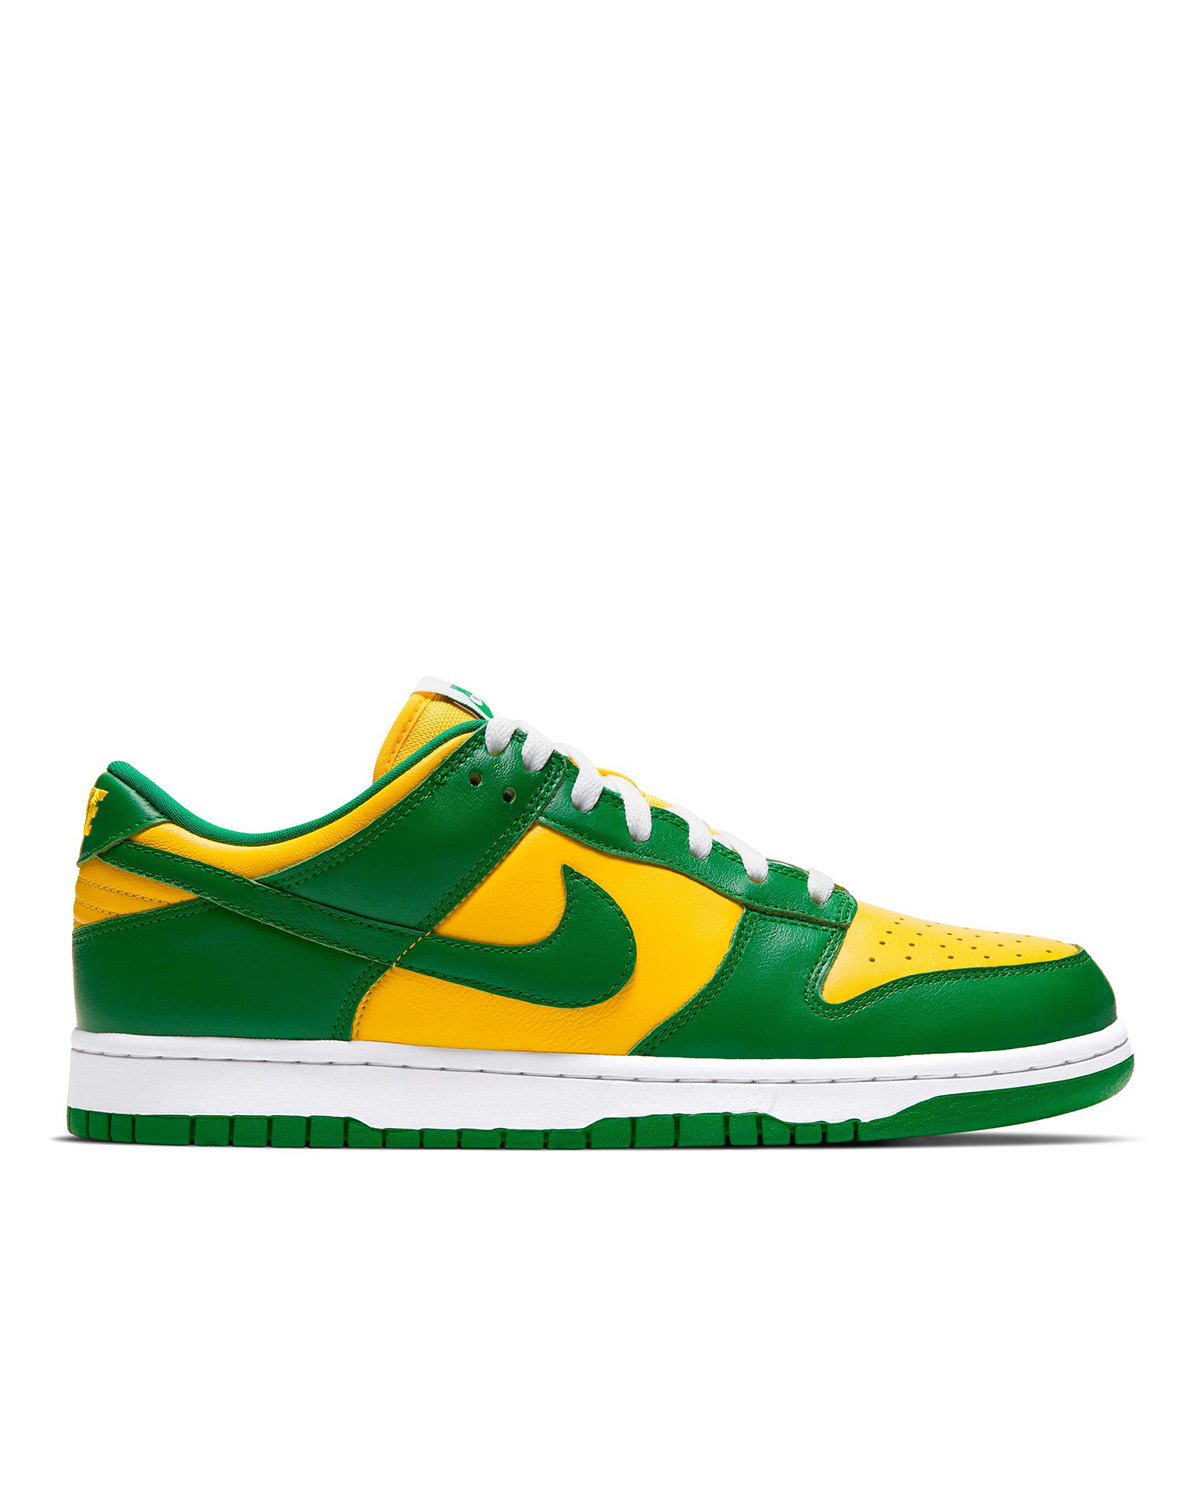 Dunk Low SP Varsity Maize/Pine Green/White